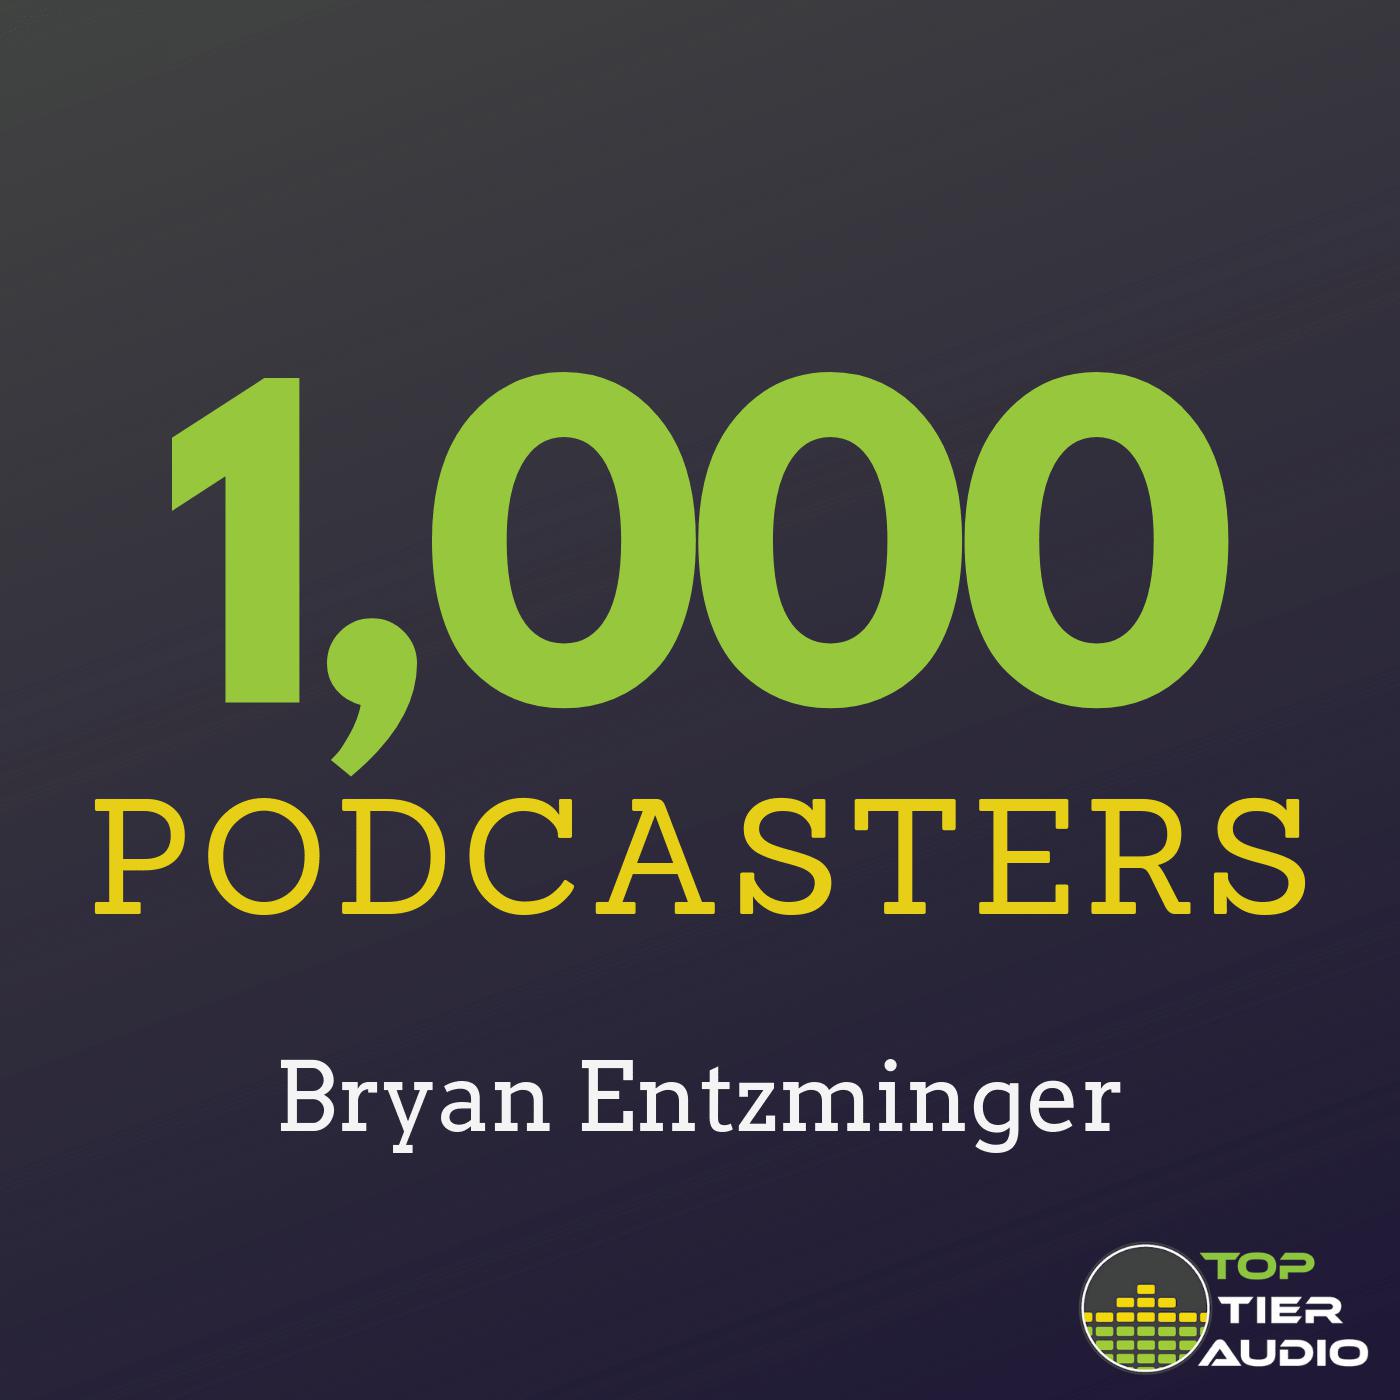 What will you do with your podcast in 2020? - 1KP0091